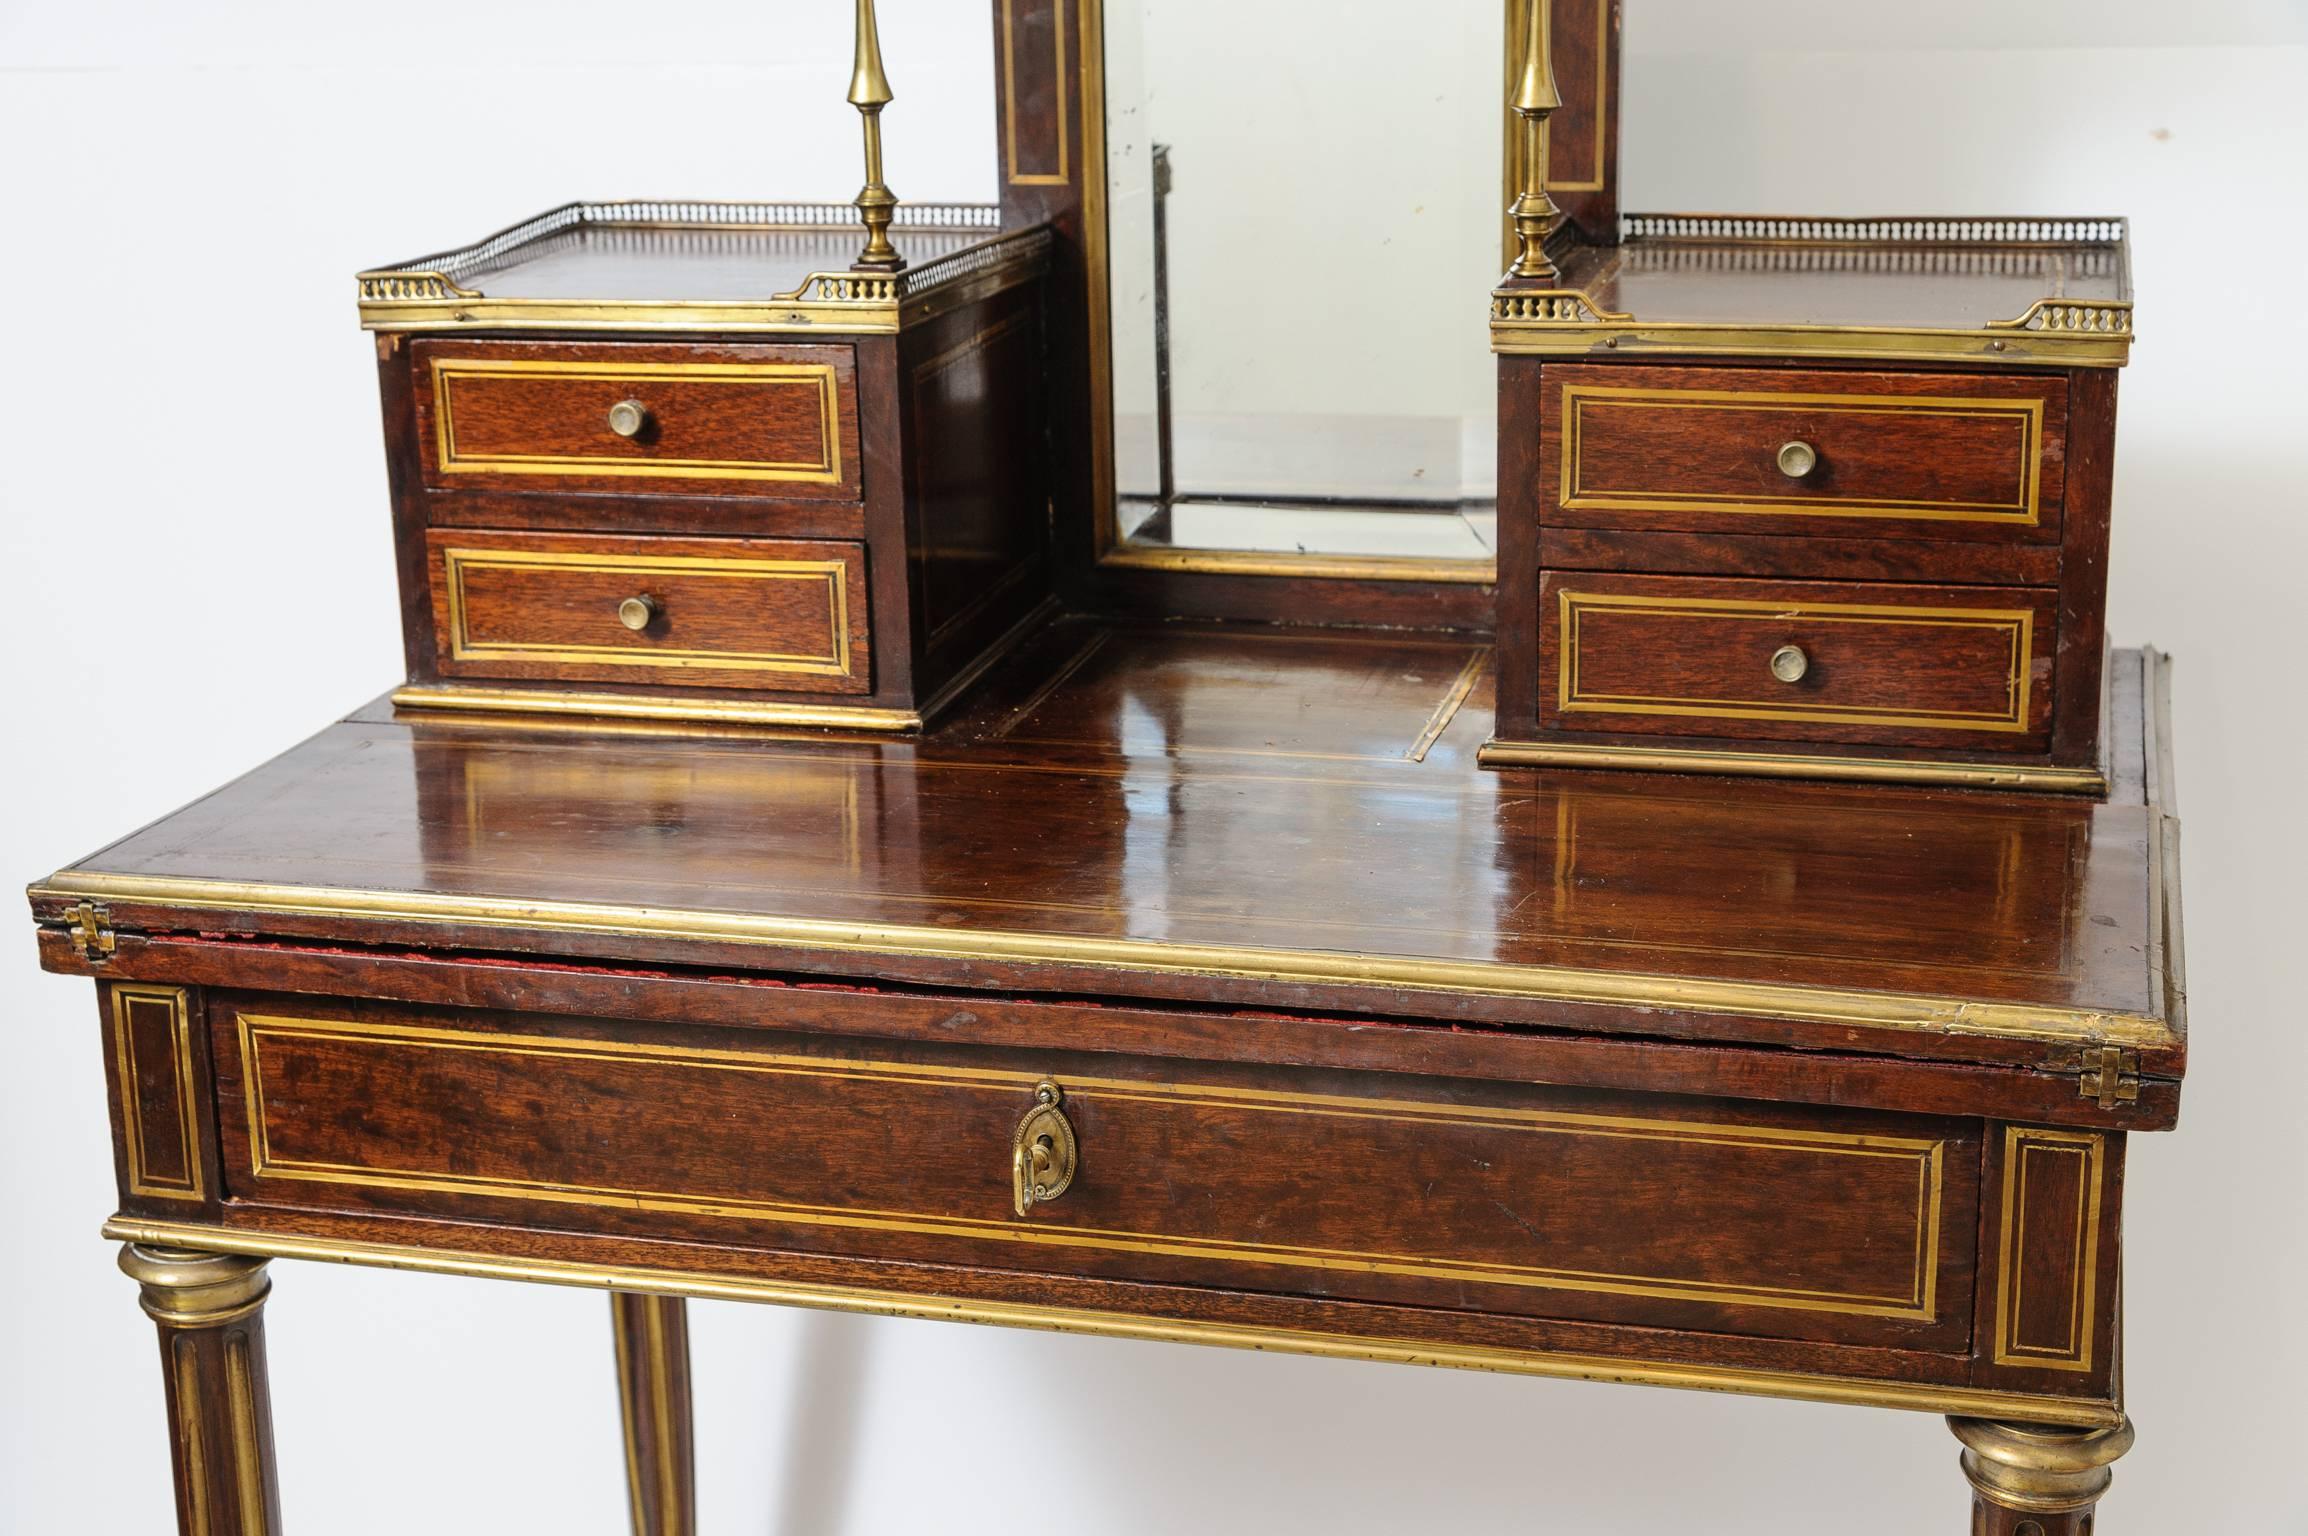 This is a superb example of a French antique ladies writing desk with mirror.
There is a brass gallery to the top brass inlay to the sides, top and legs.
This was made circa 1880 and would have been a very expensive desk when made it has the